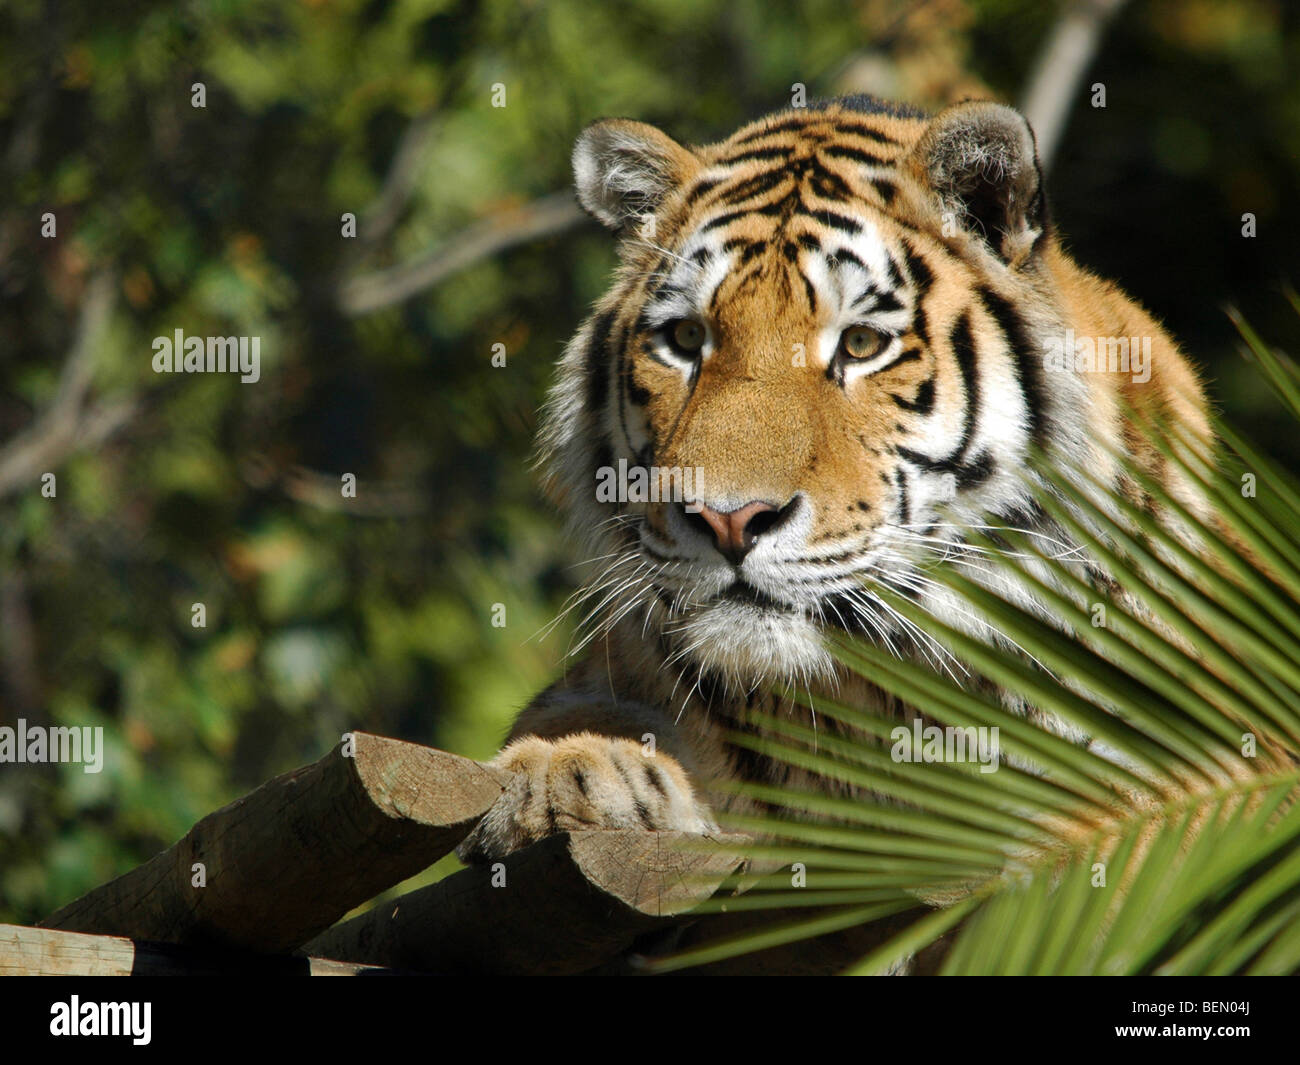 A tiger in a Zoo in Lisbon, Portugal. Stock Photo